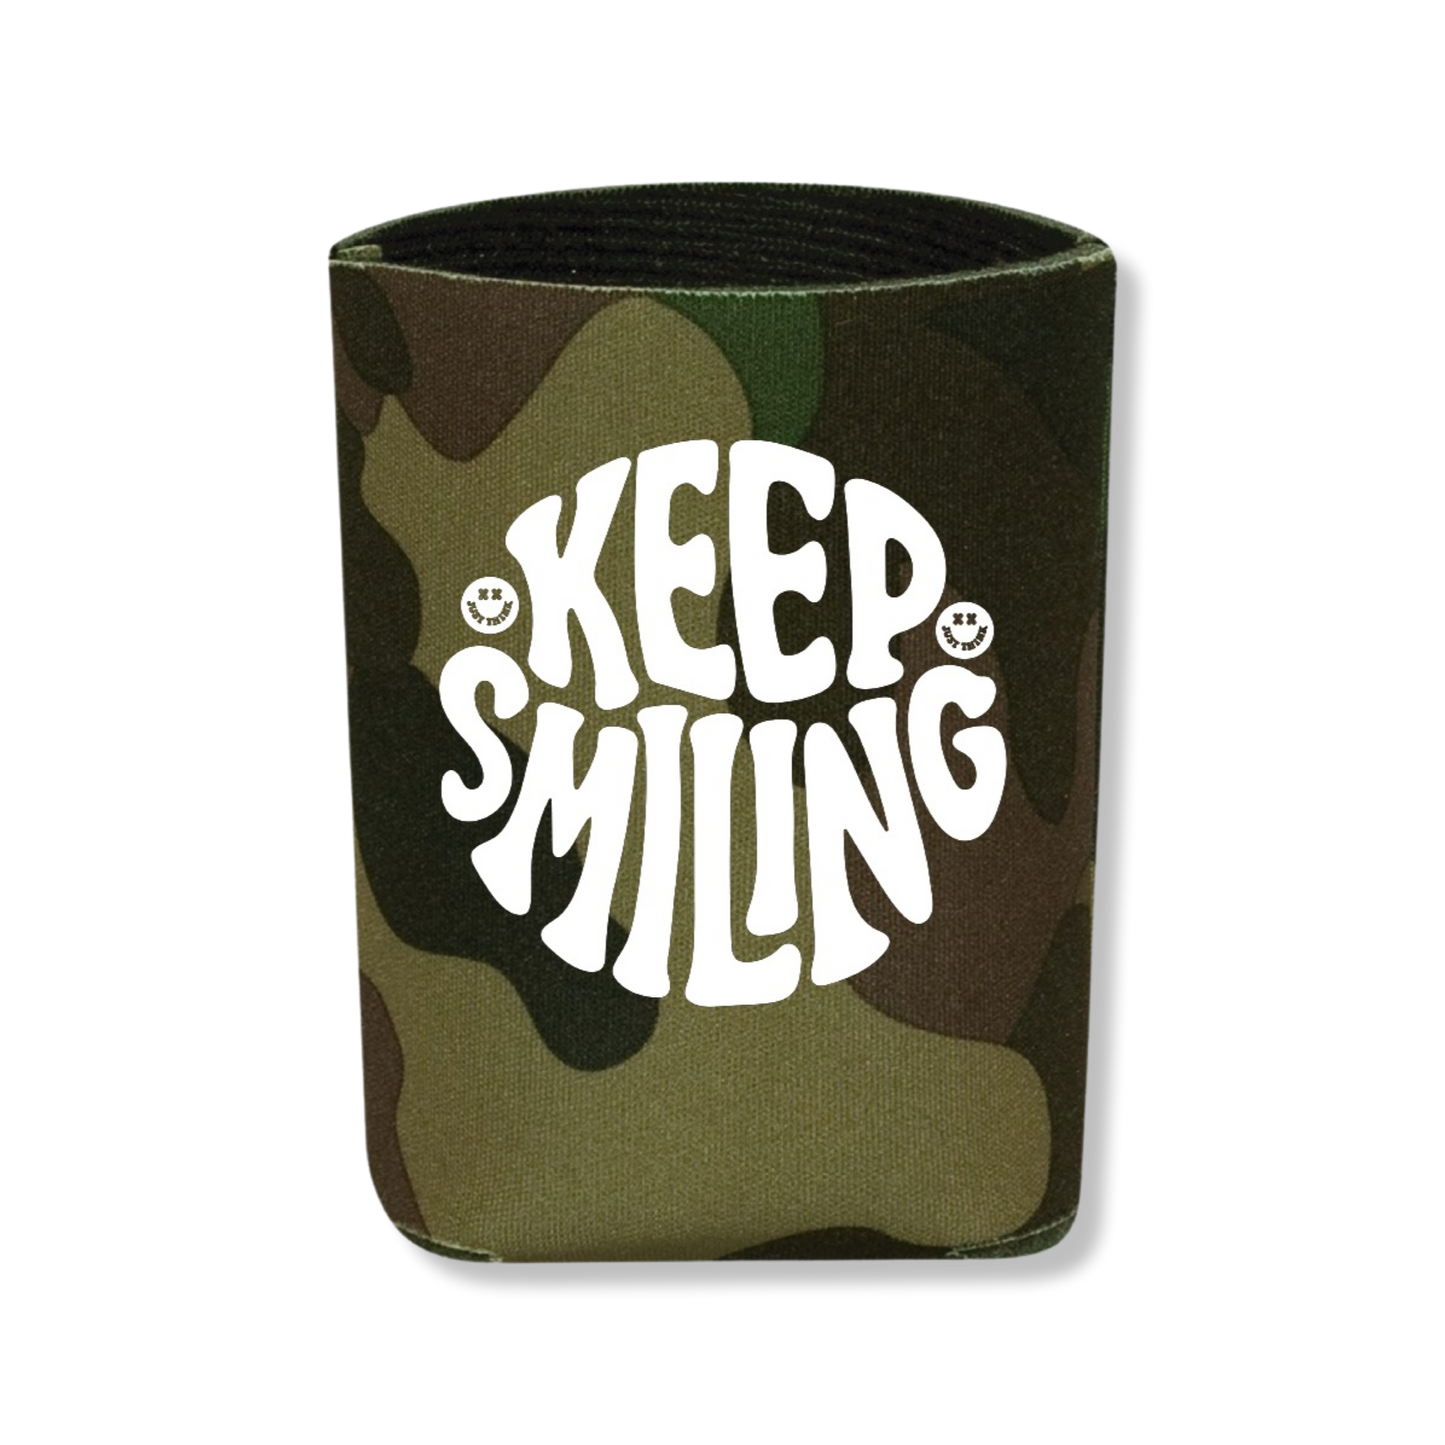 Coozie - Keep Smiling